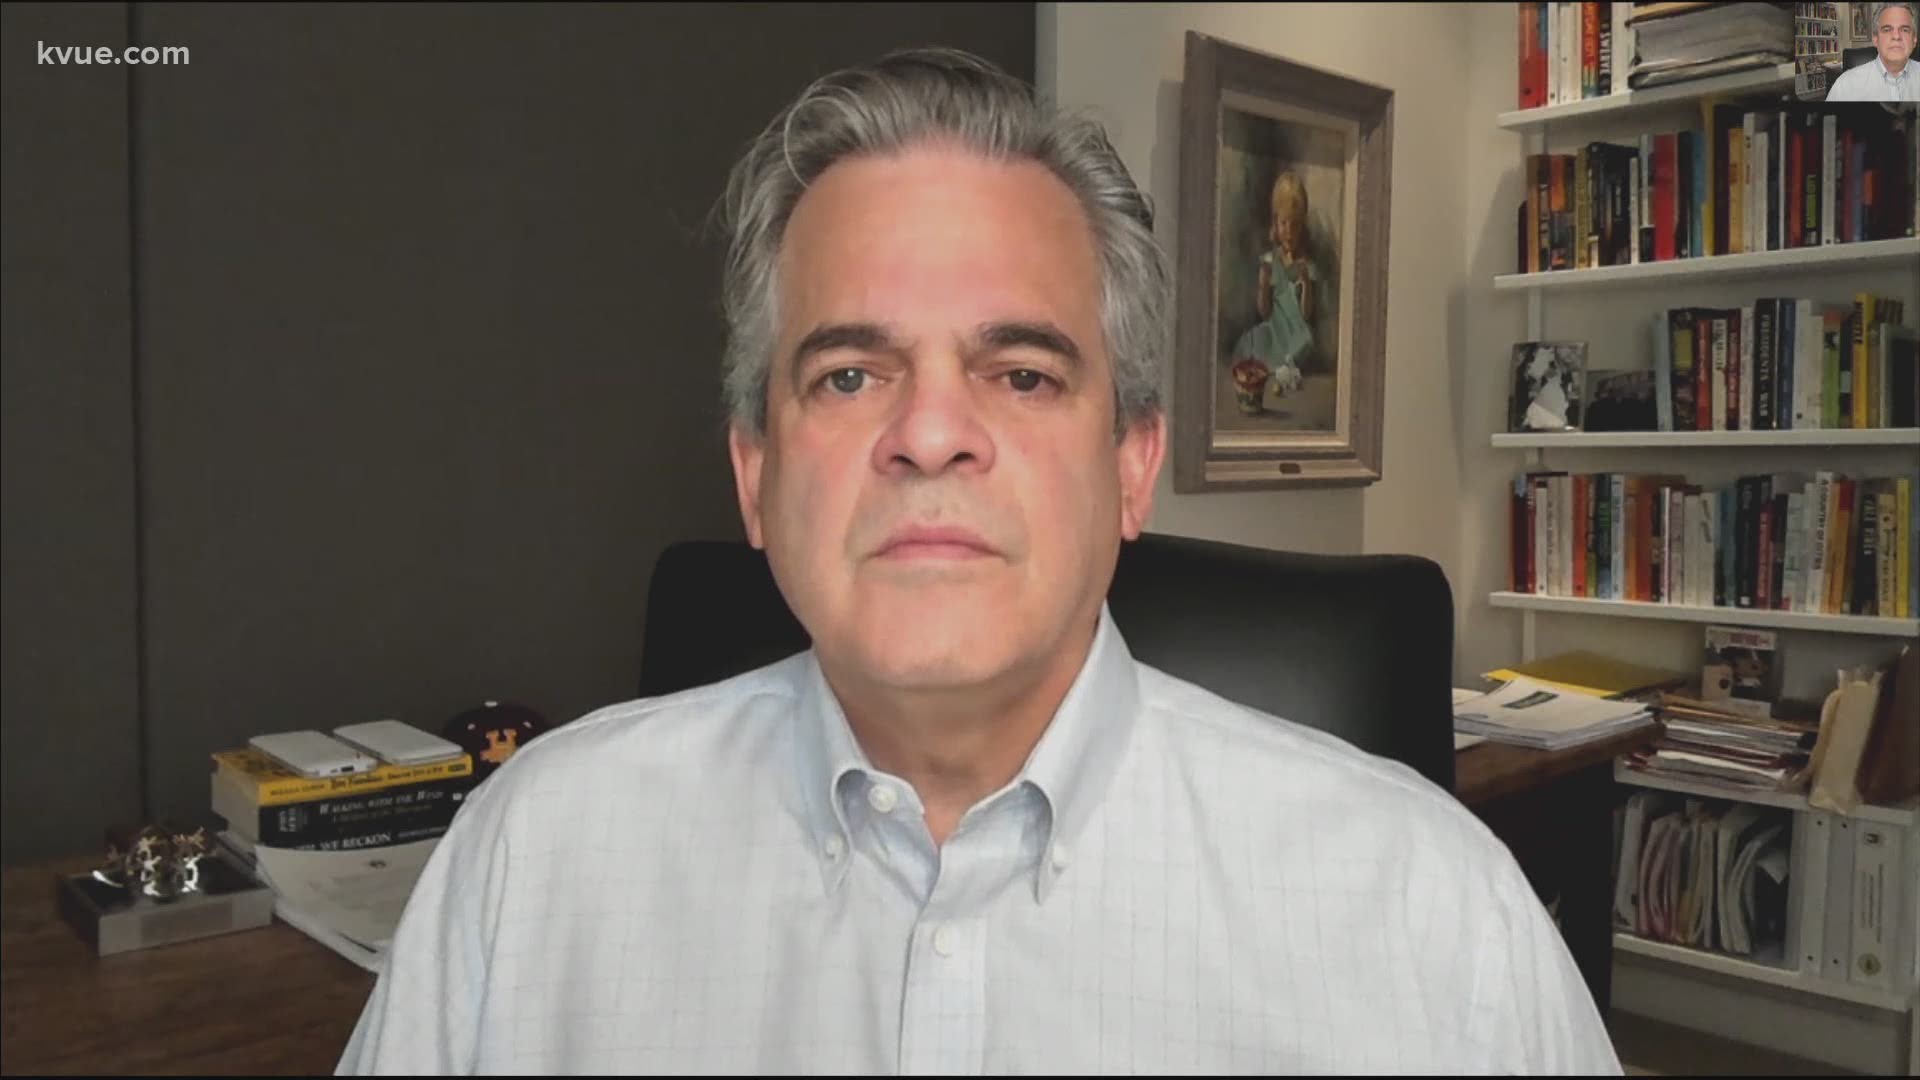 Mayor Steve Adler talked about the APD budget cuts and discussed the coronavirus pandemic.